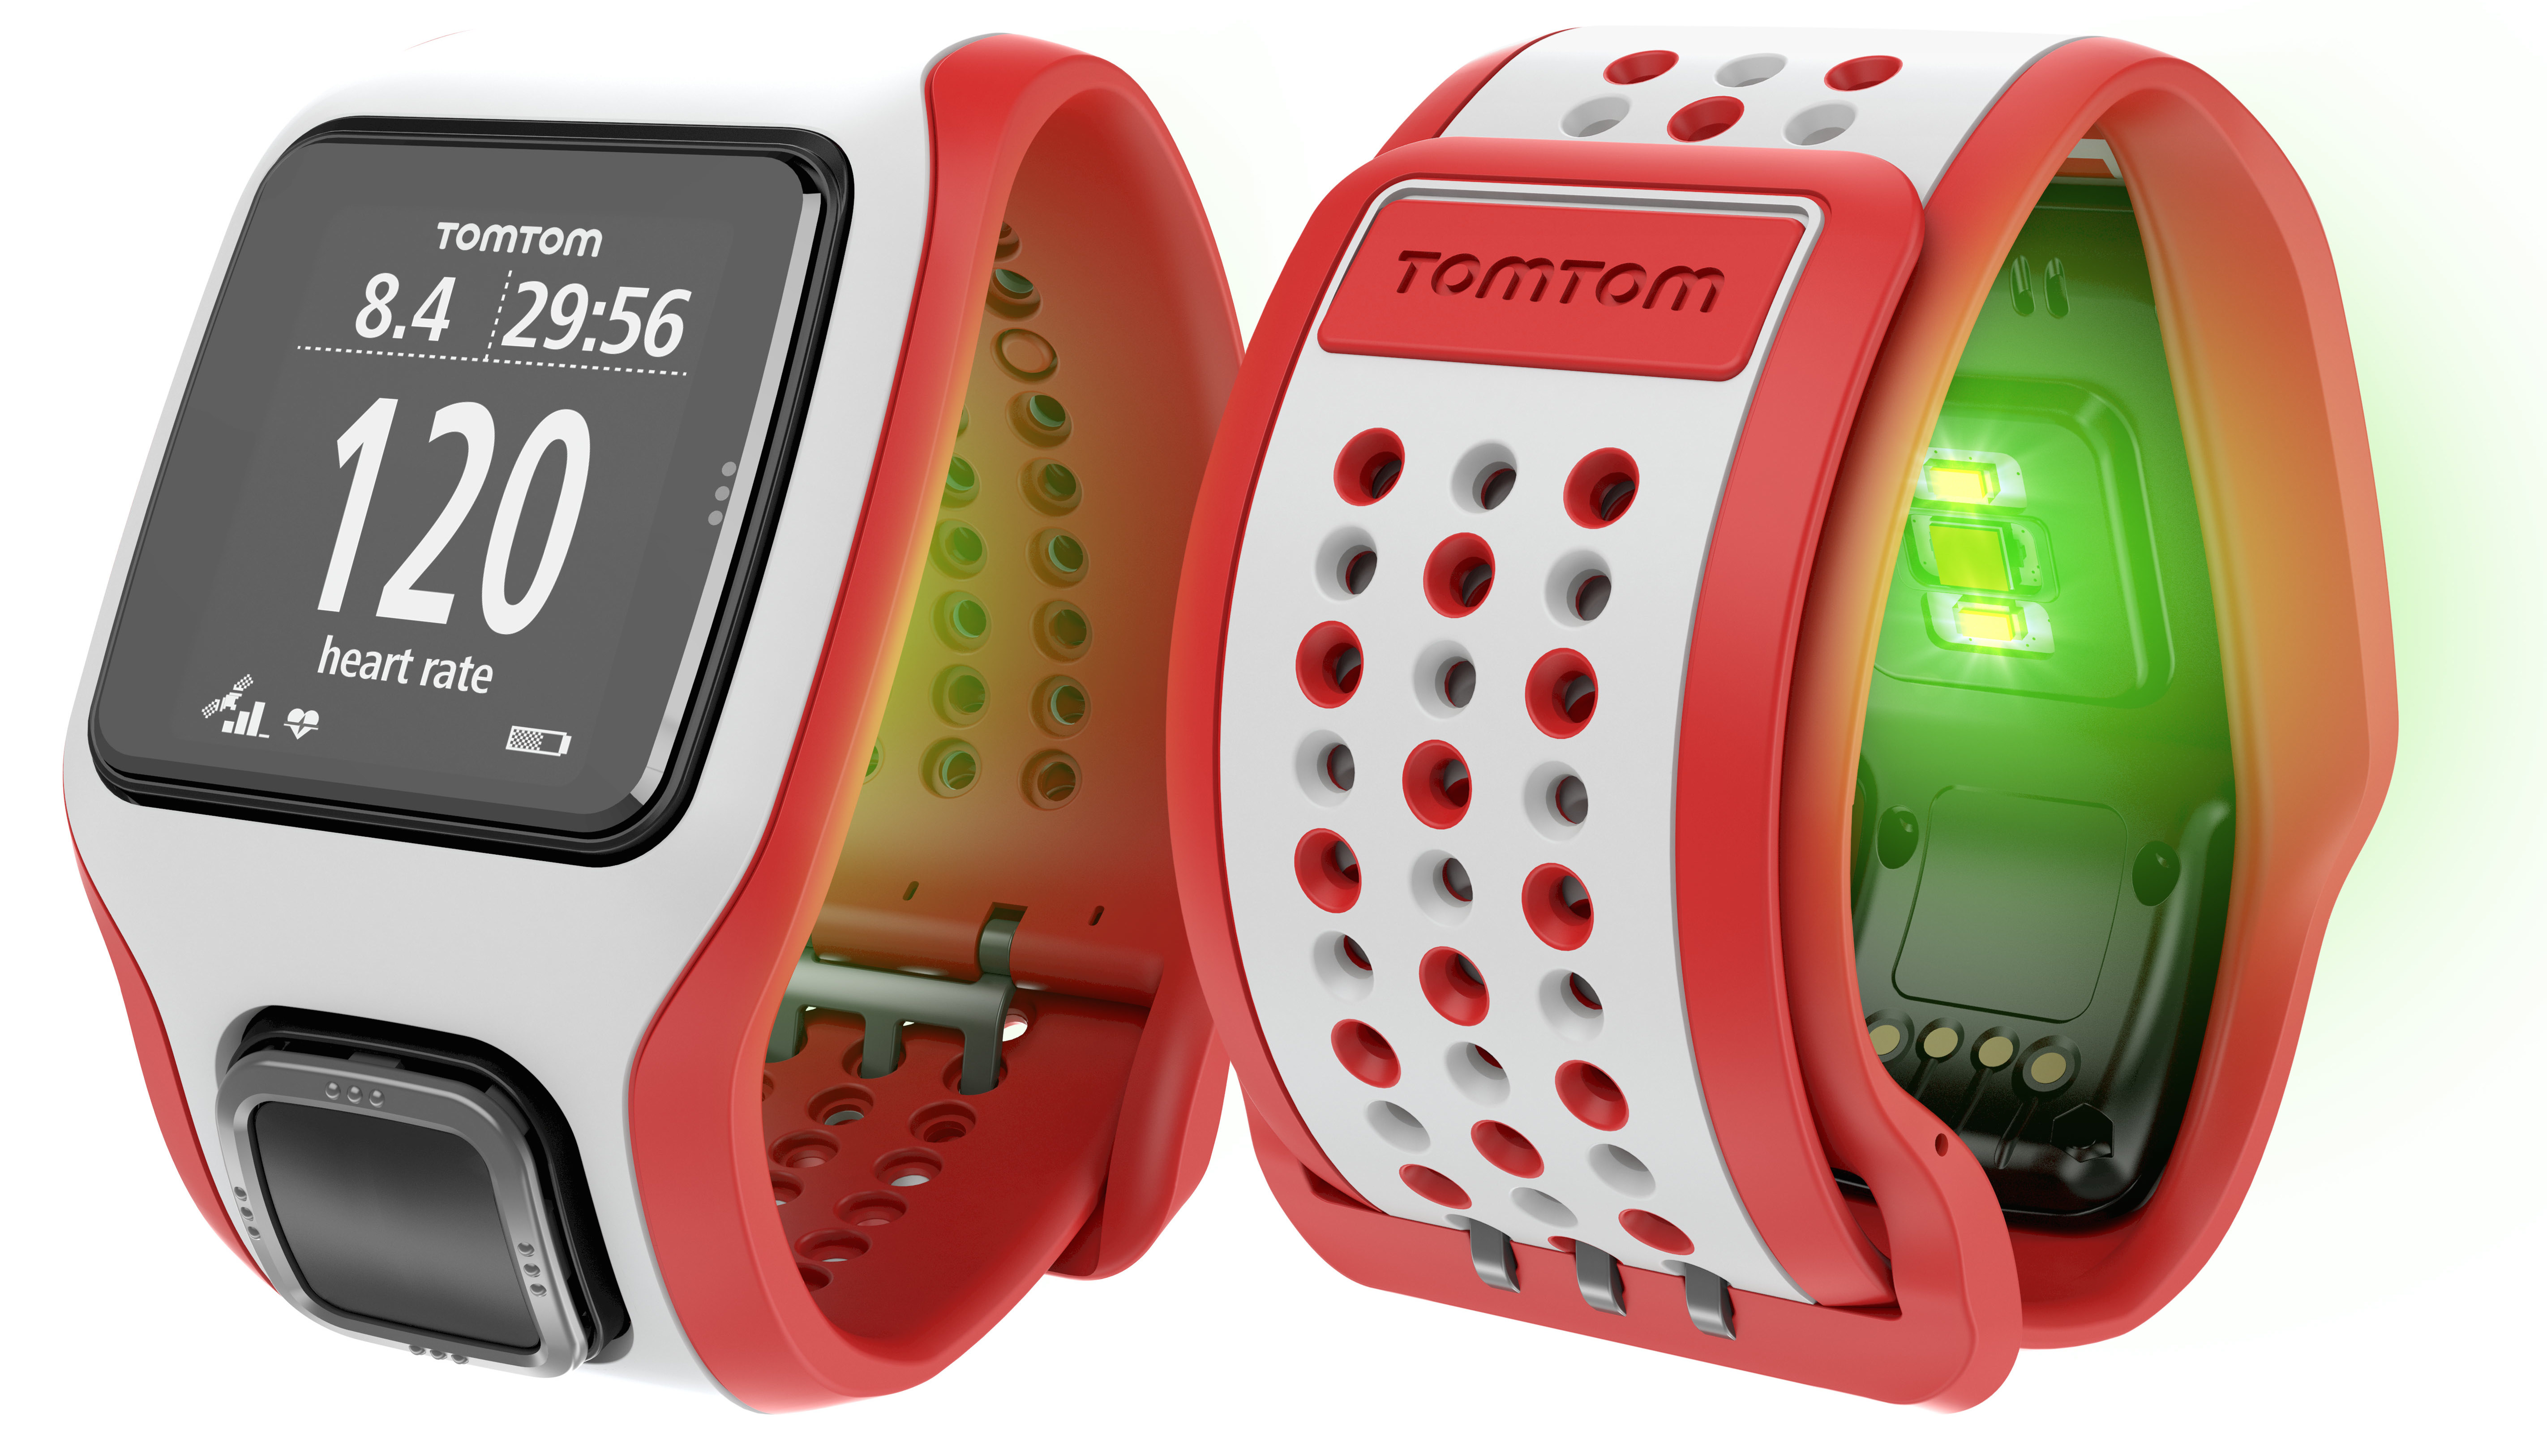 ild Vejfremstillingsproces Indlejre TomTom Cardio Sport Watches Offer GPS And Heart Rate Tracking In One Light  Package | TechCrunch